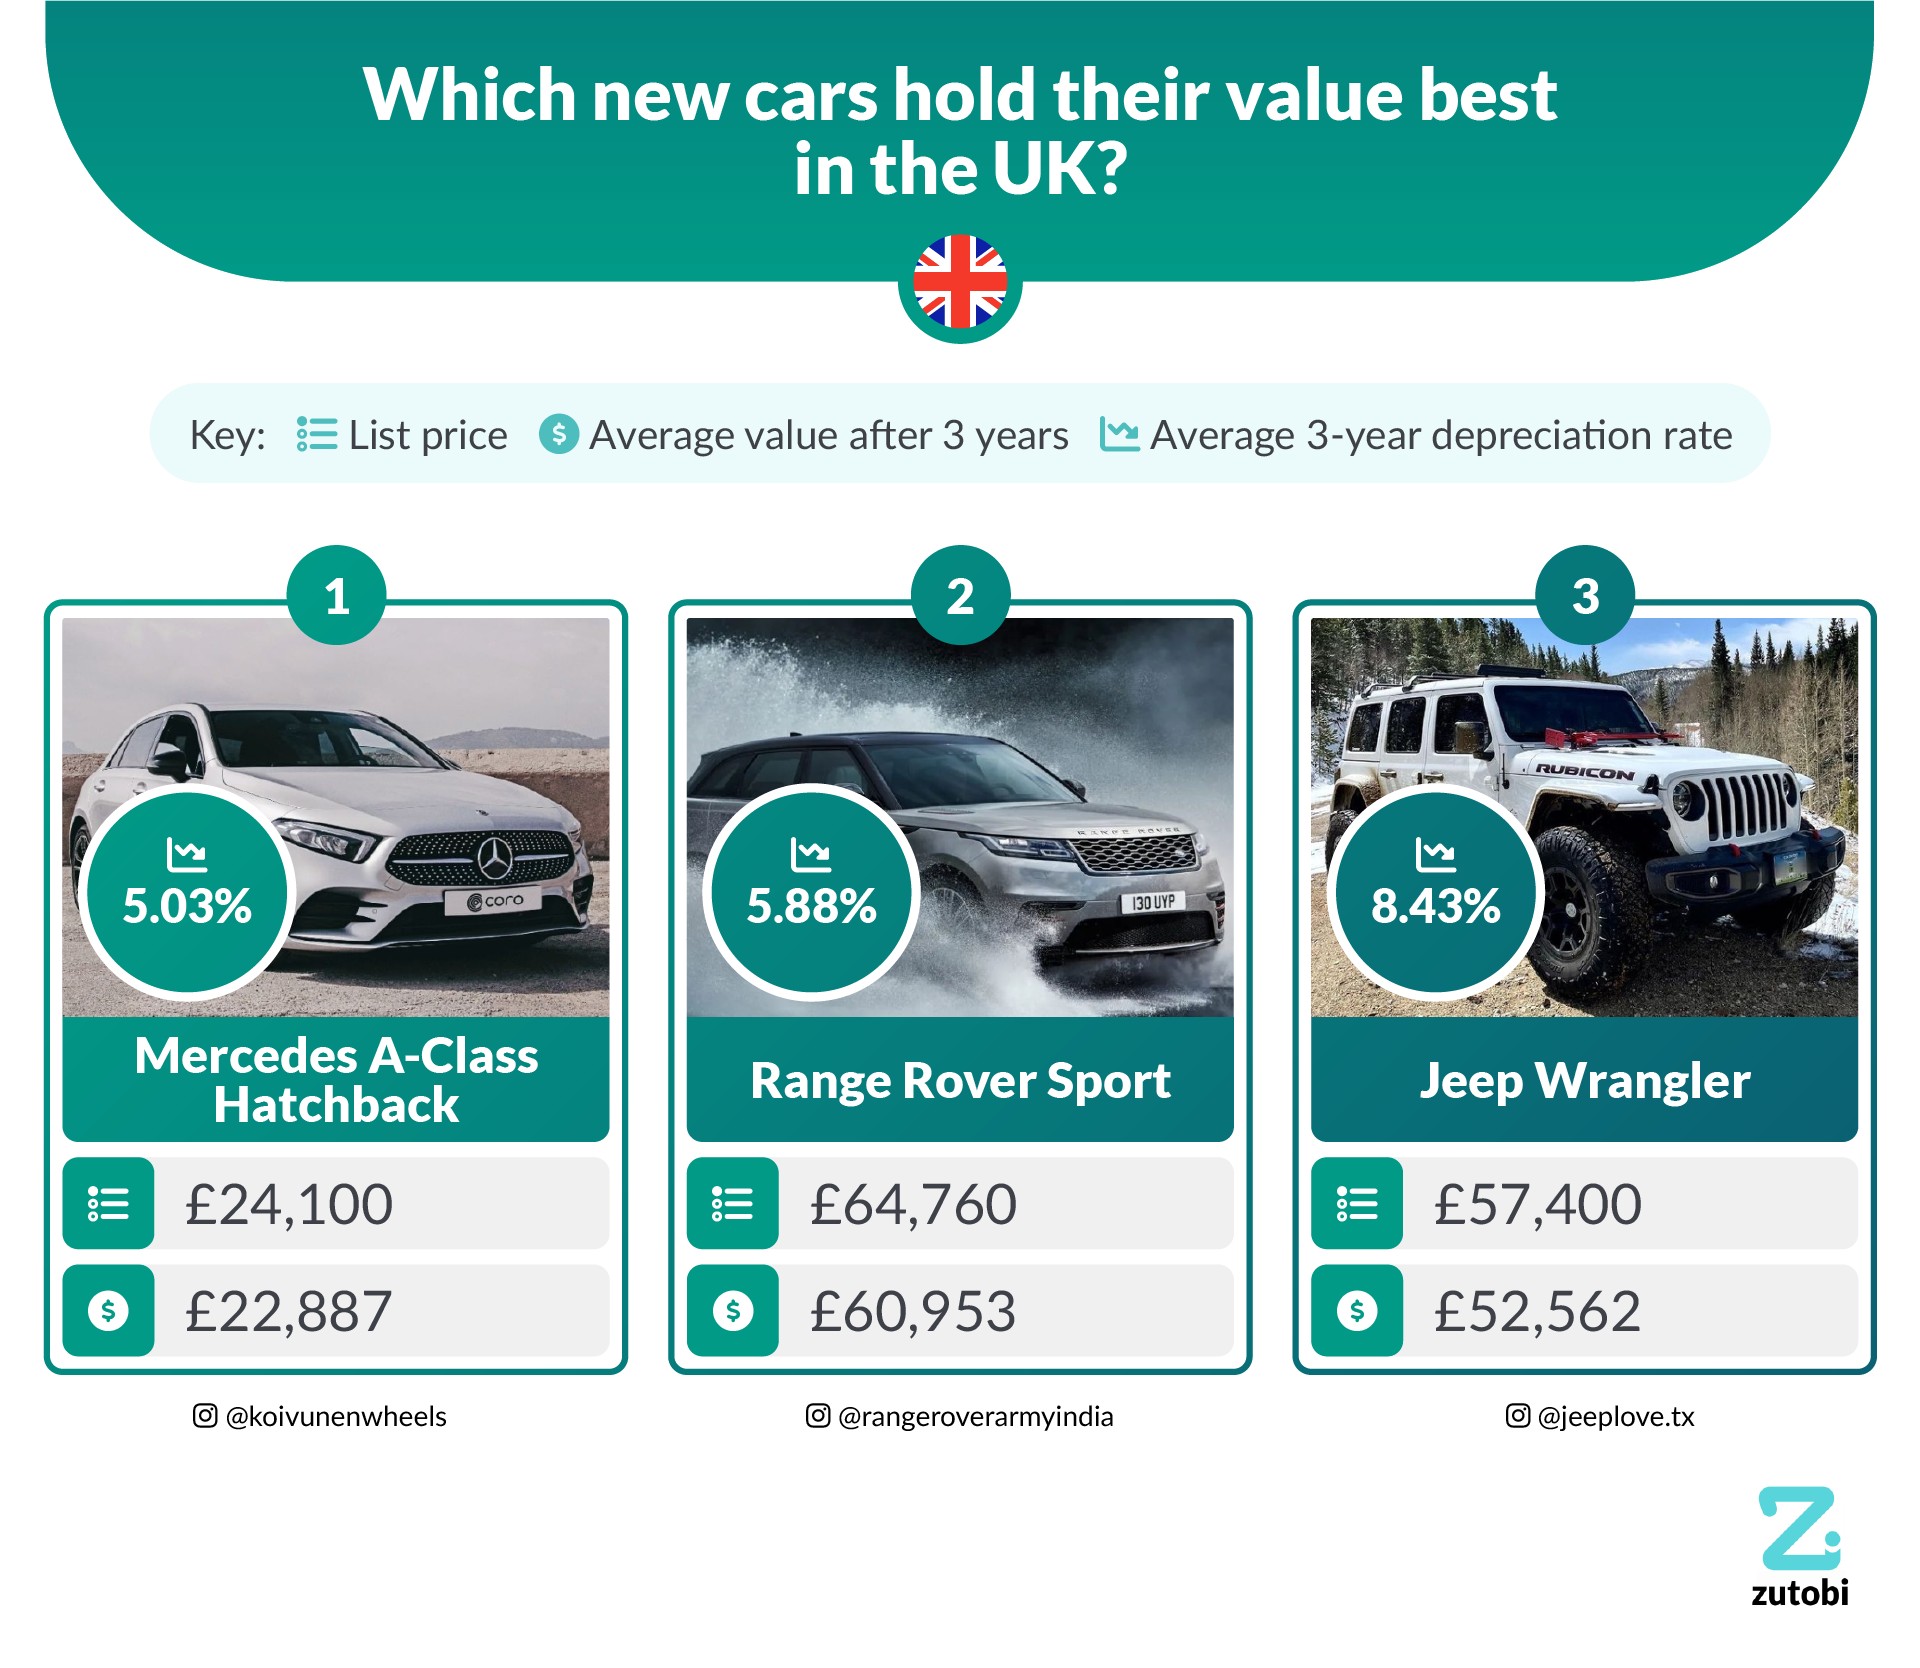 The Mercedes-Benz A-Class retains its value better than any other new car in the UK